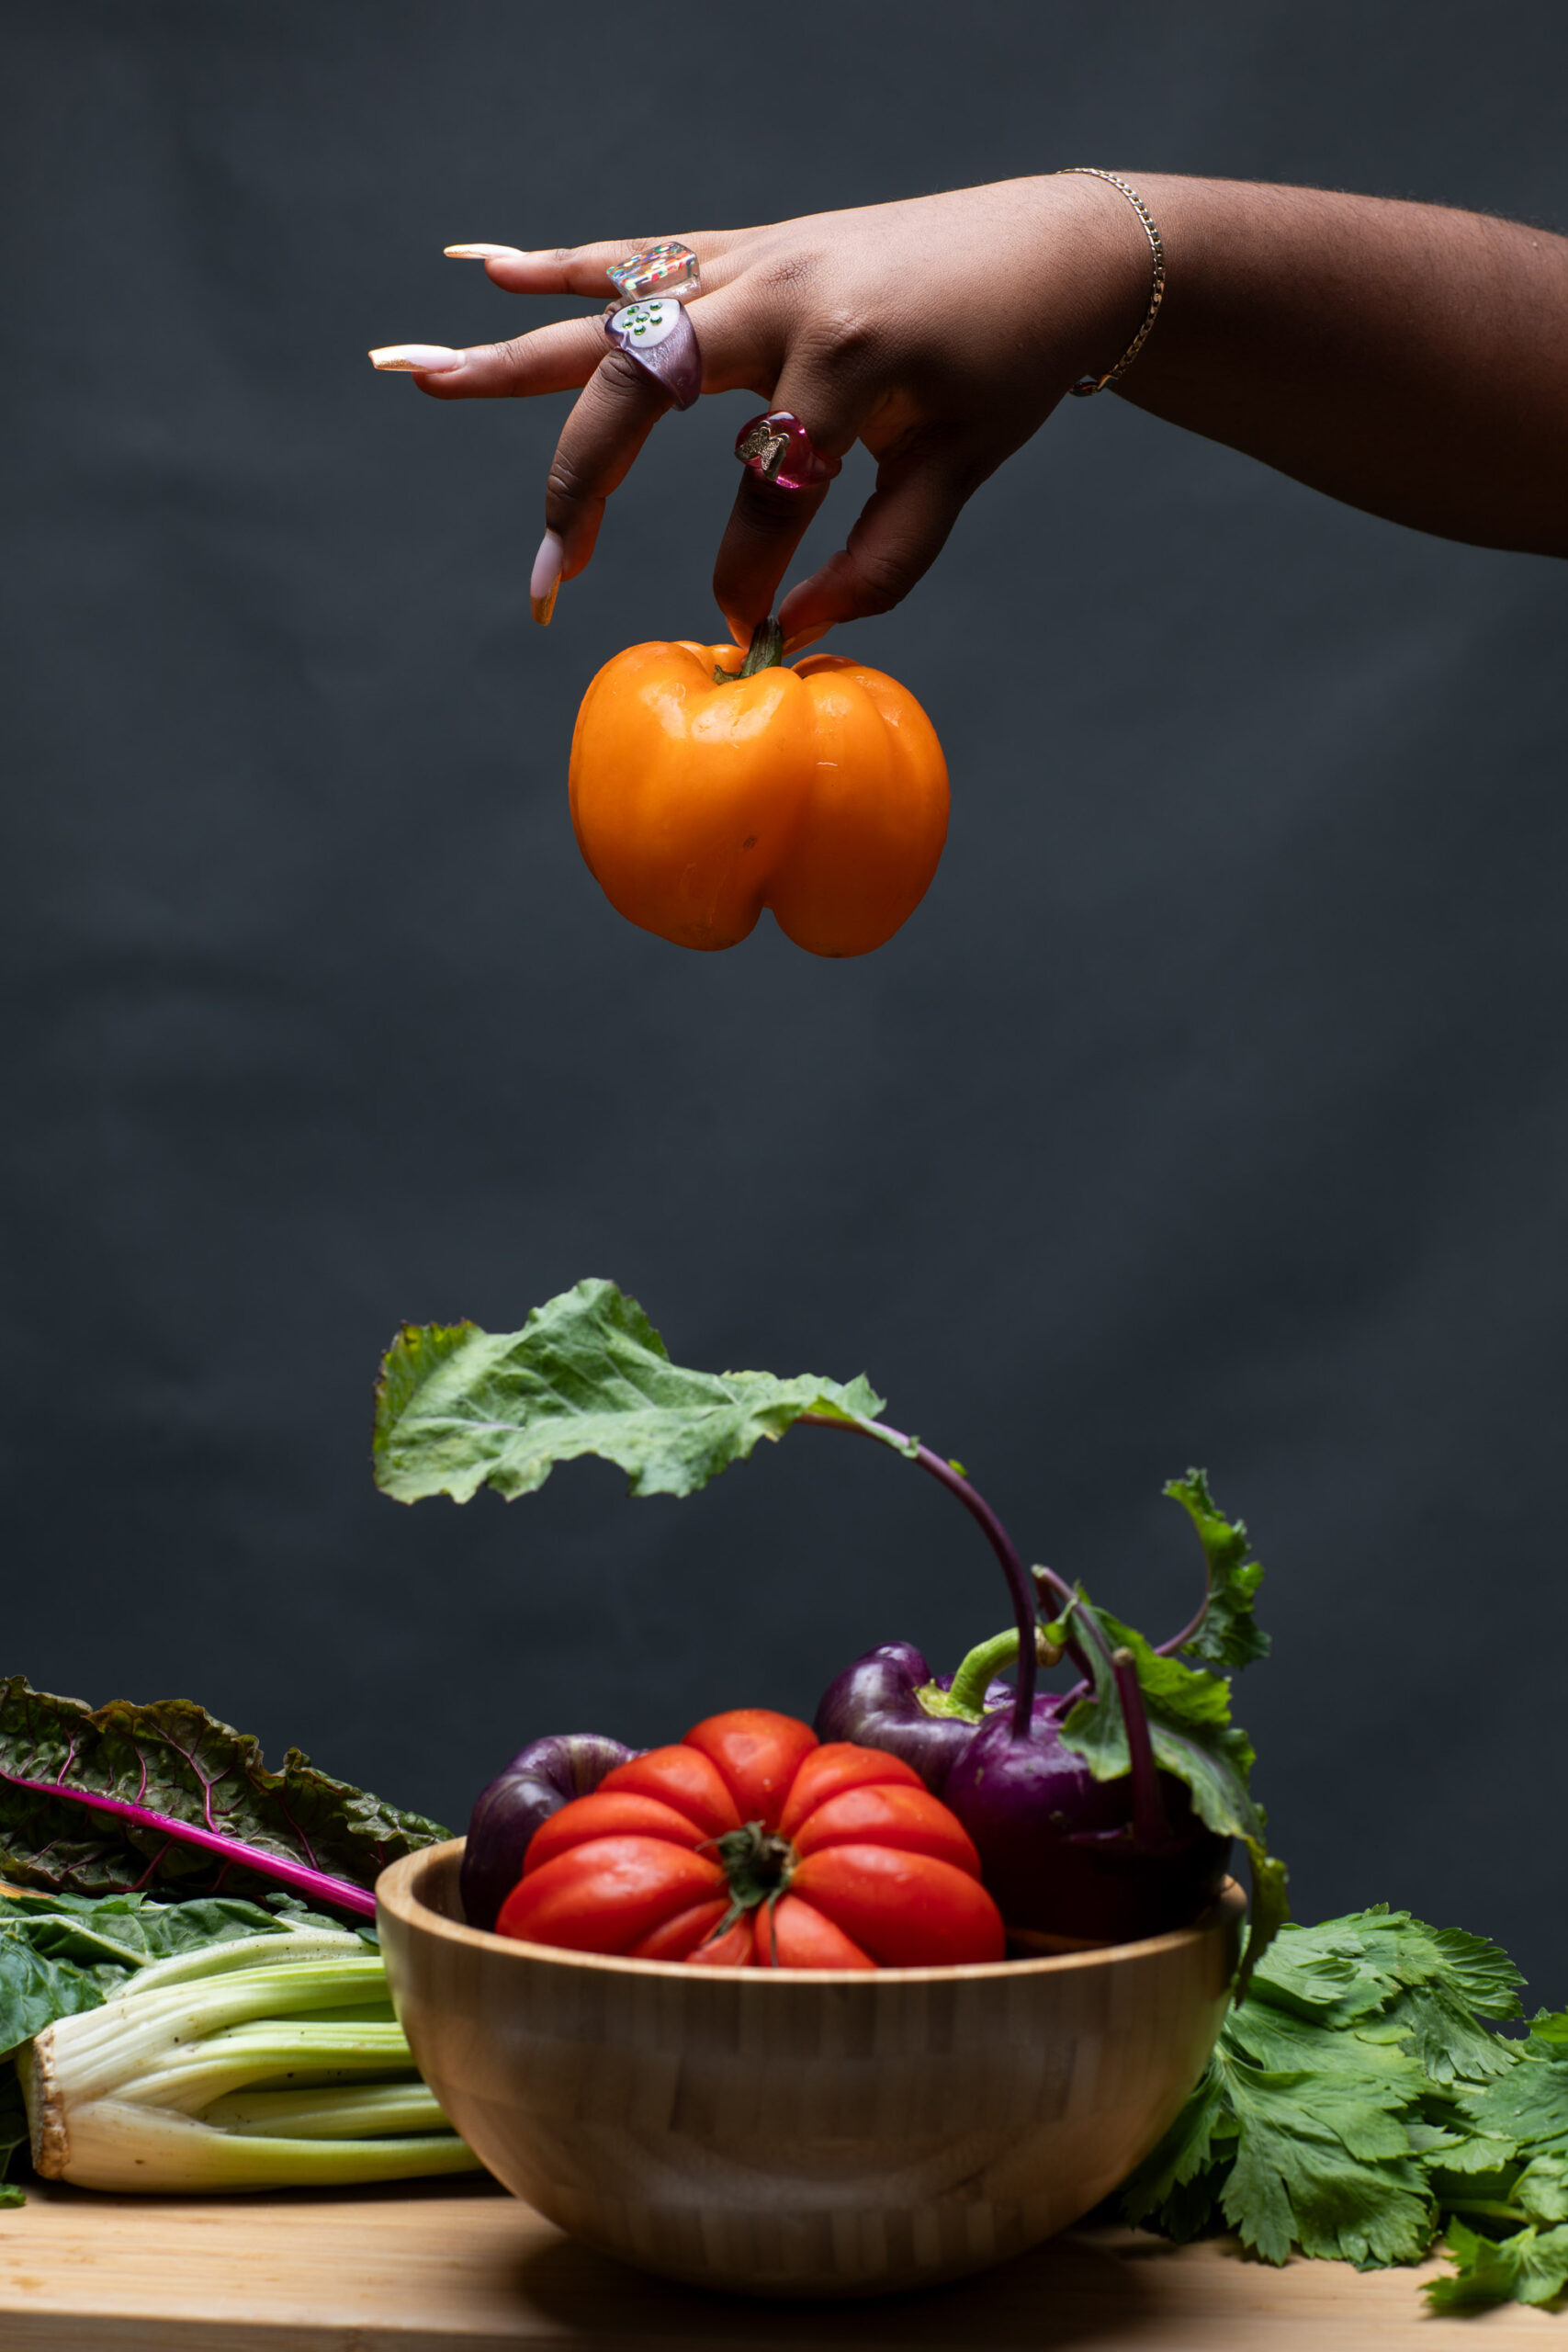 A hand holding an orange bell pepper over a bowl of multicolored vegetables.